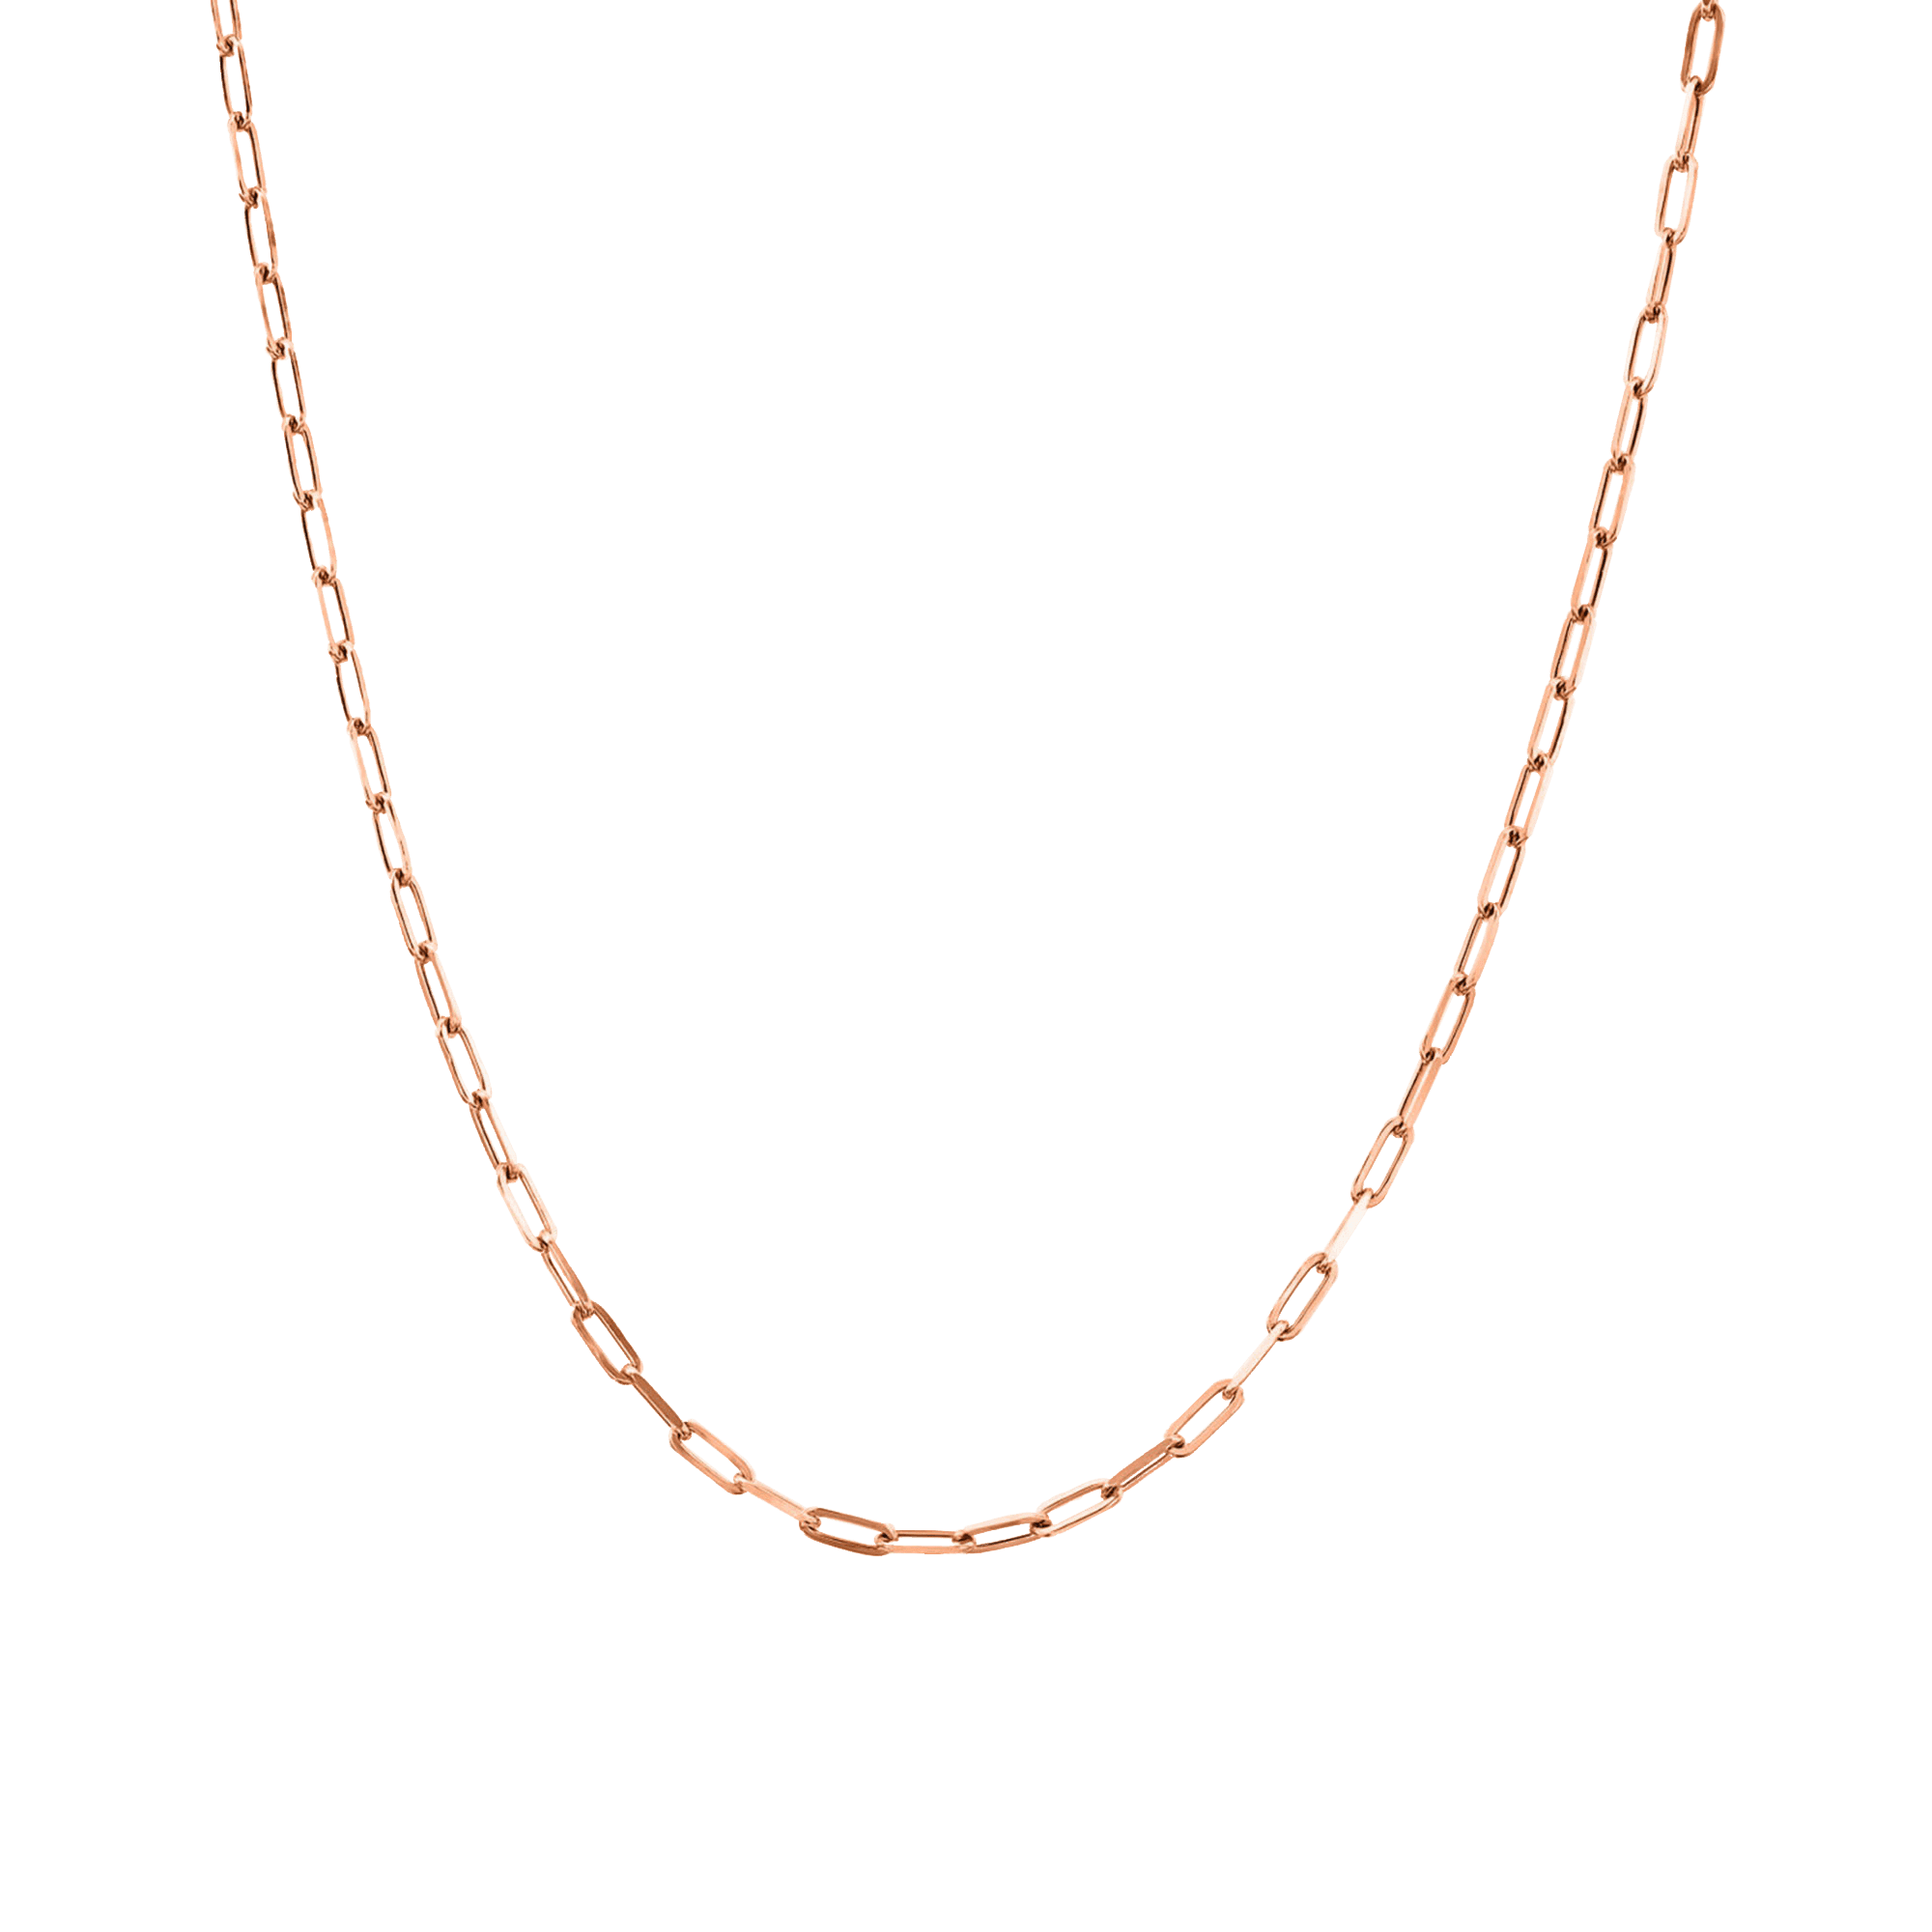 Fine Chain Necklace Adjustable 61cm/24' in 18k Gold Vermeil on Sterling  Silver | Jewellery by Monica Vinader